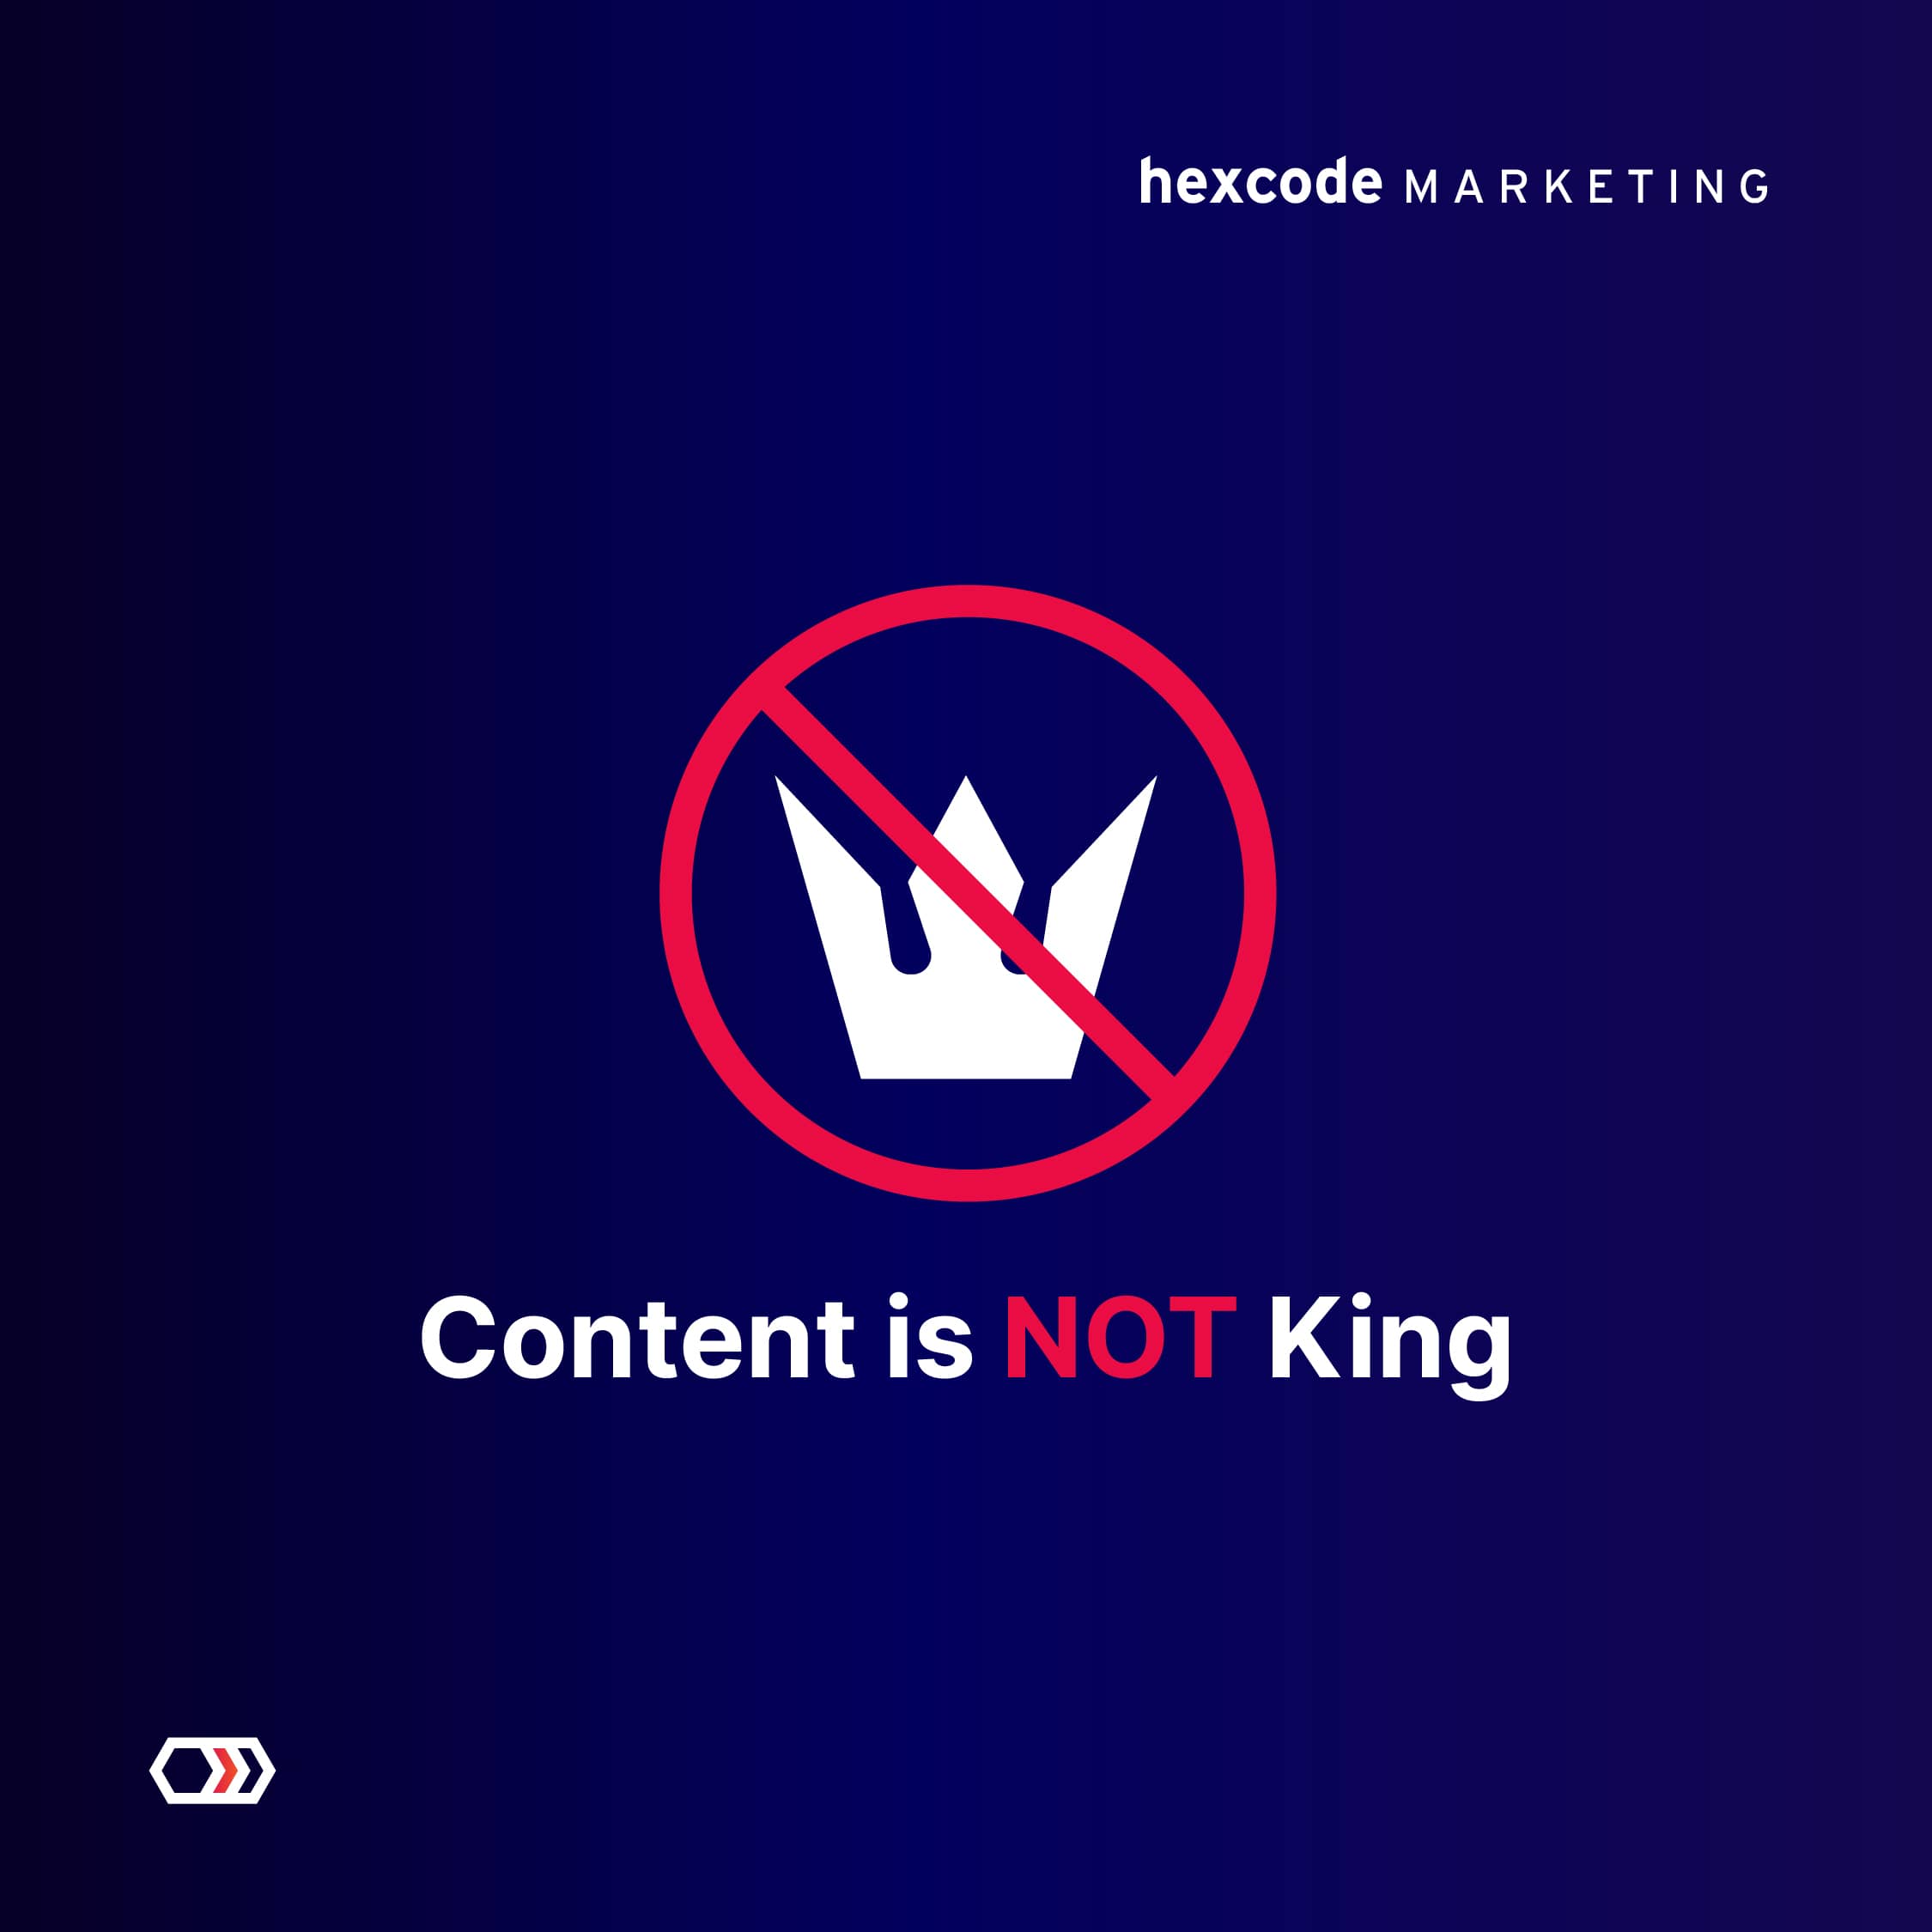 Content is Not King